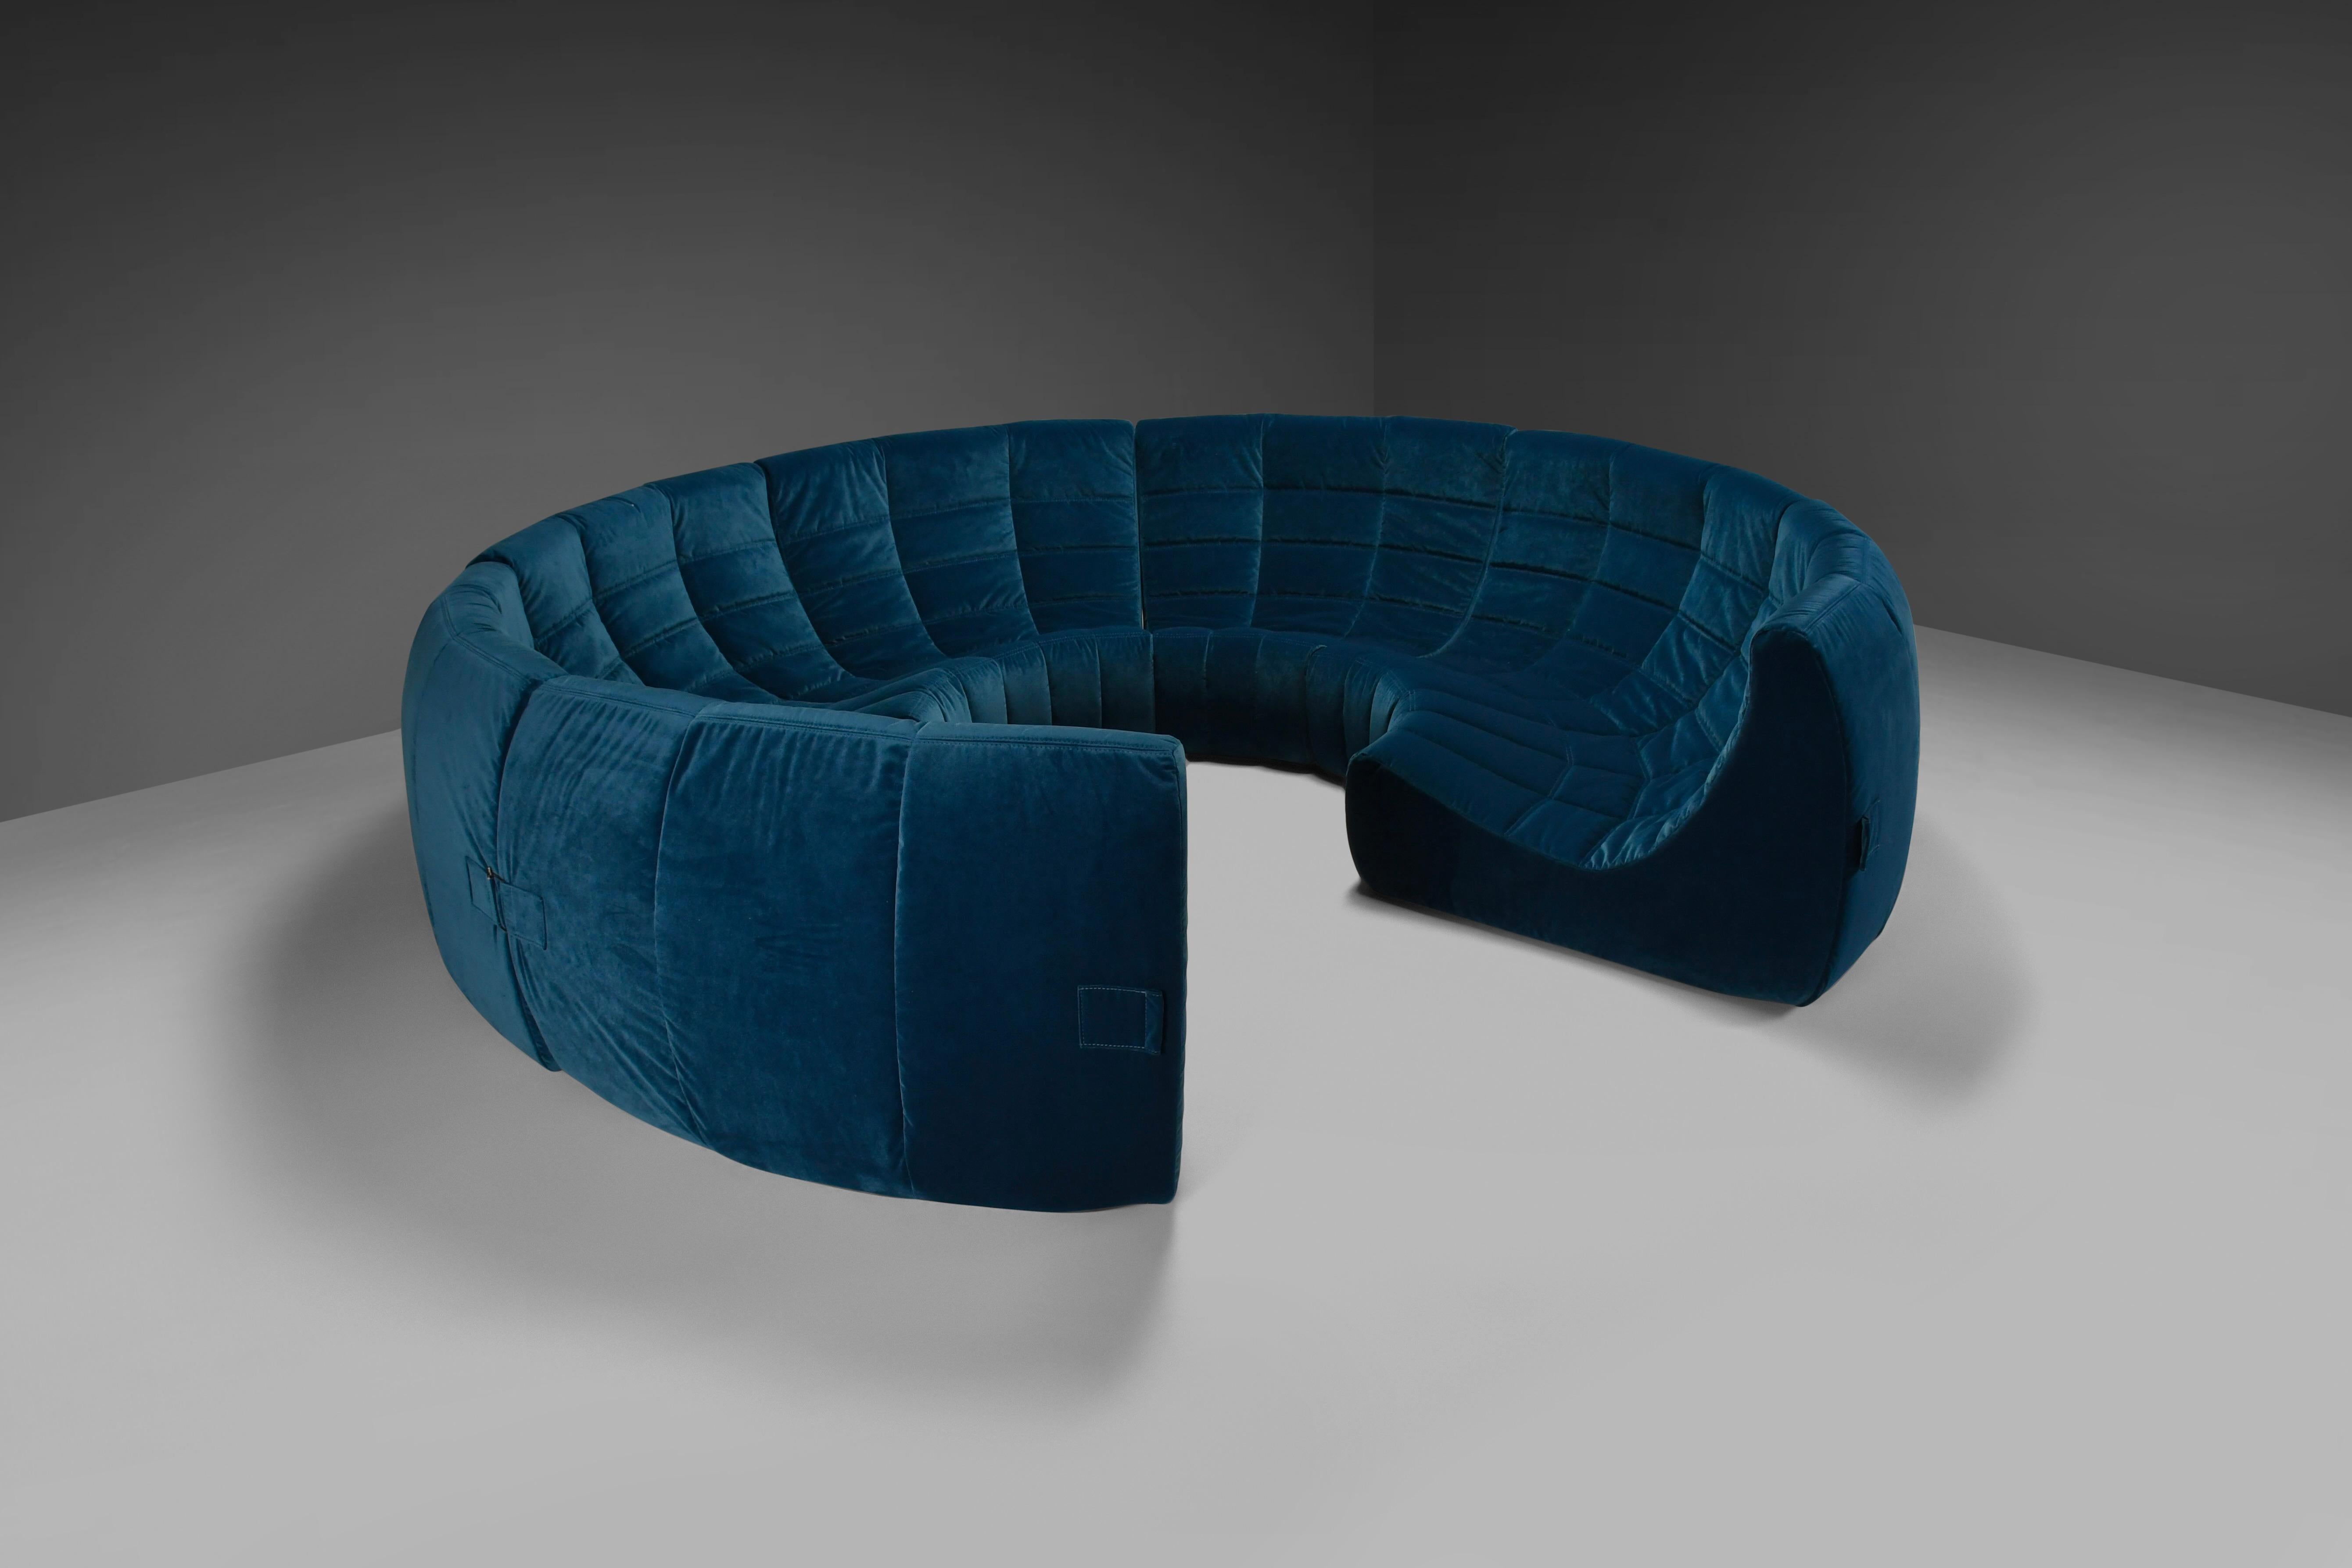 French Rare and Exceptional 'Gilda' Circle Sofa in Velvet by Michel Ducaroy, 1972 For Sale